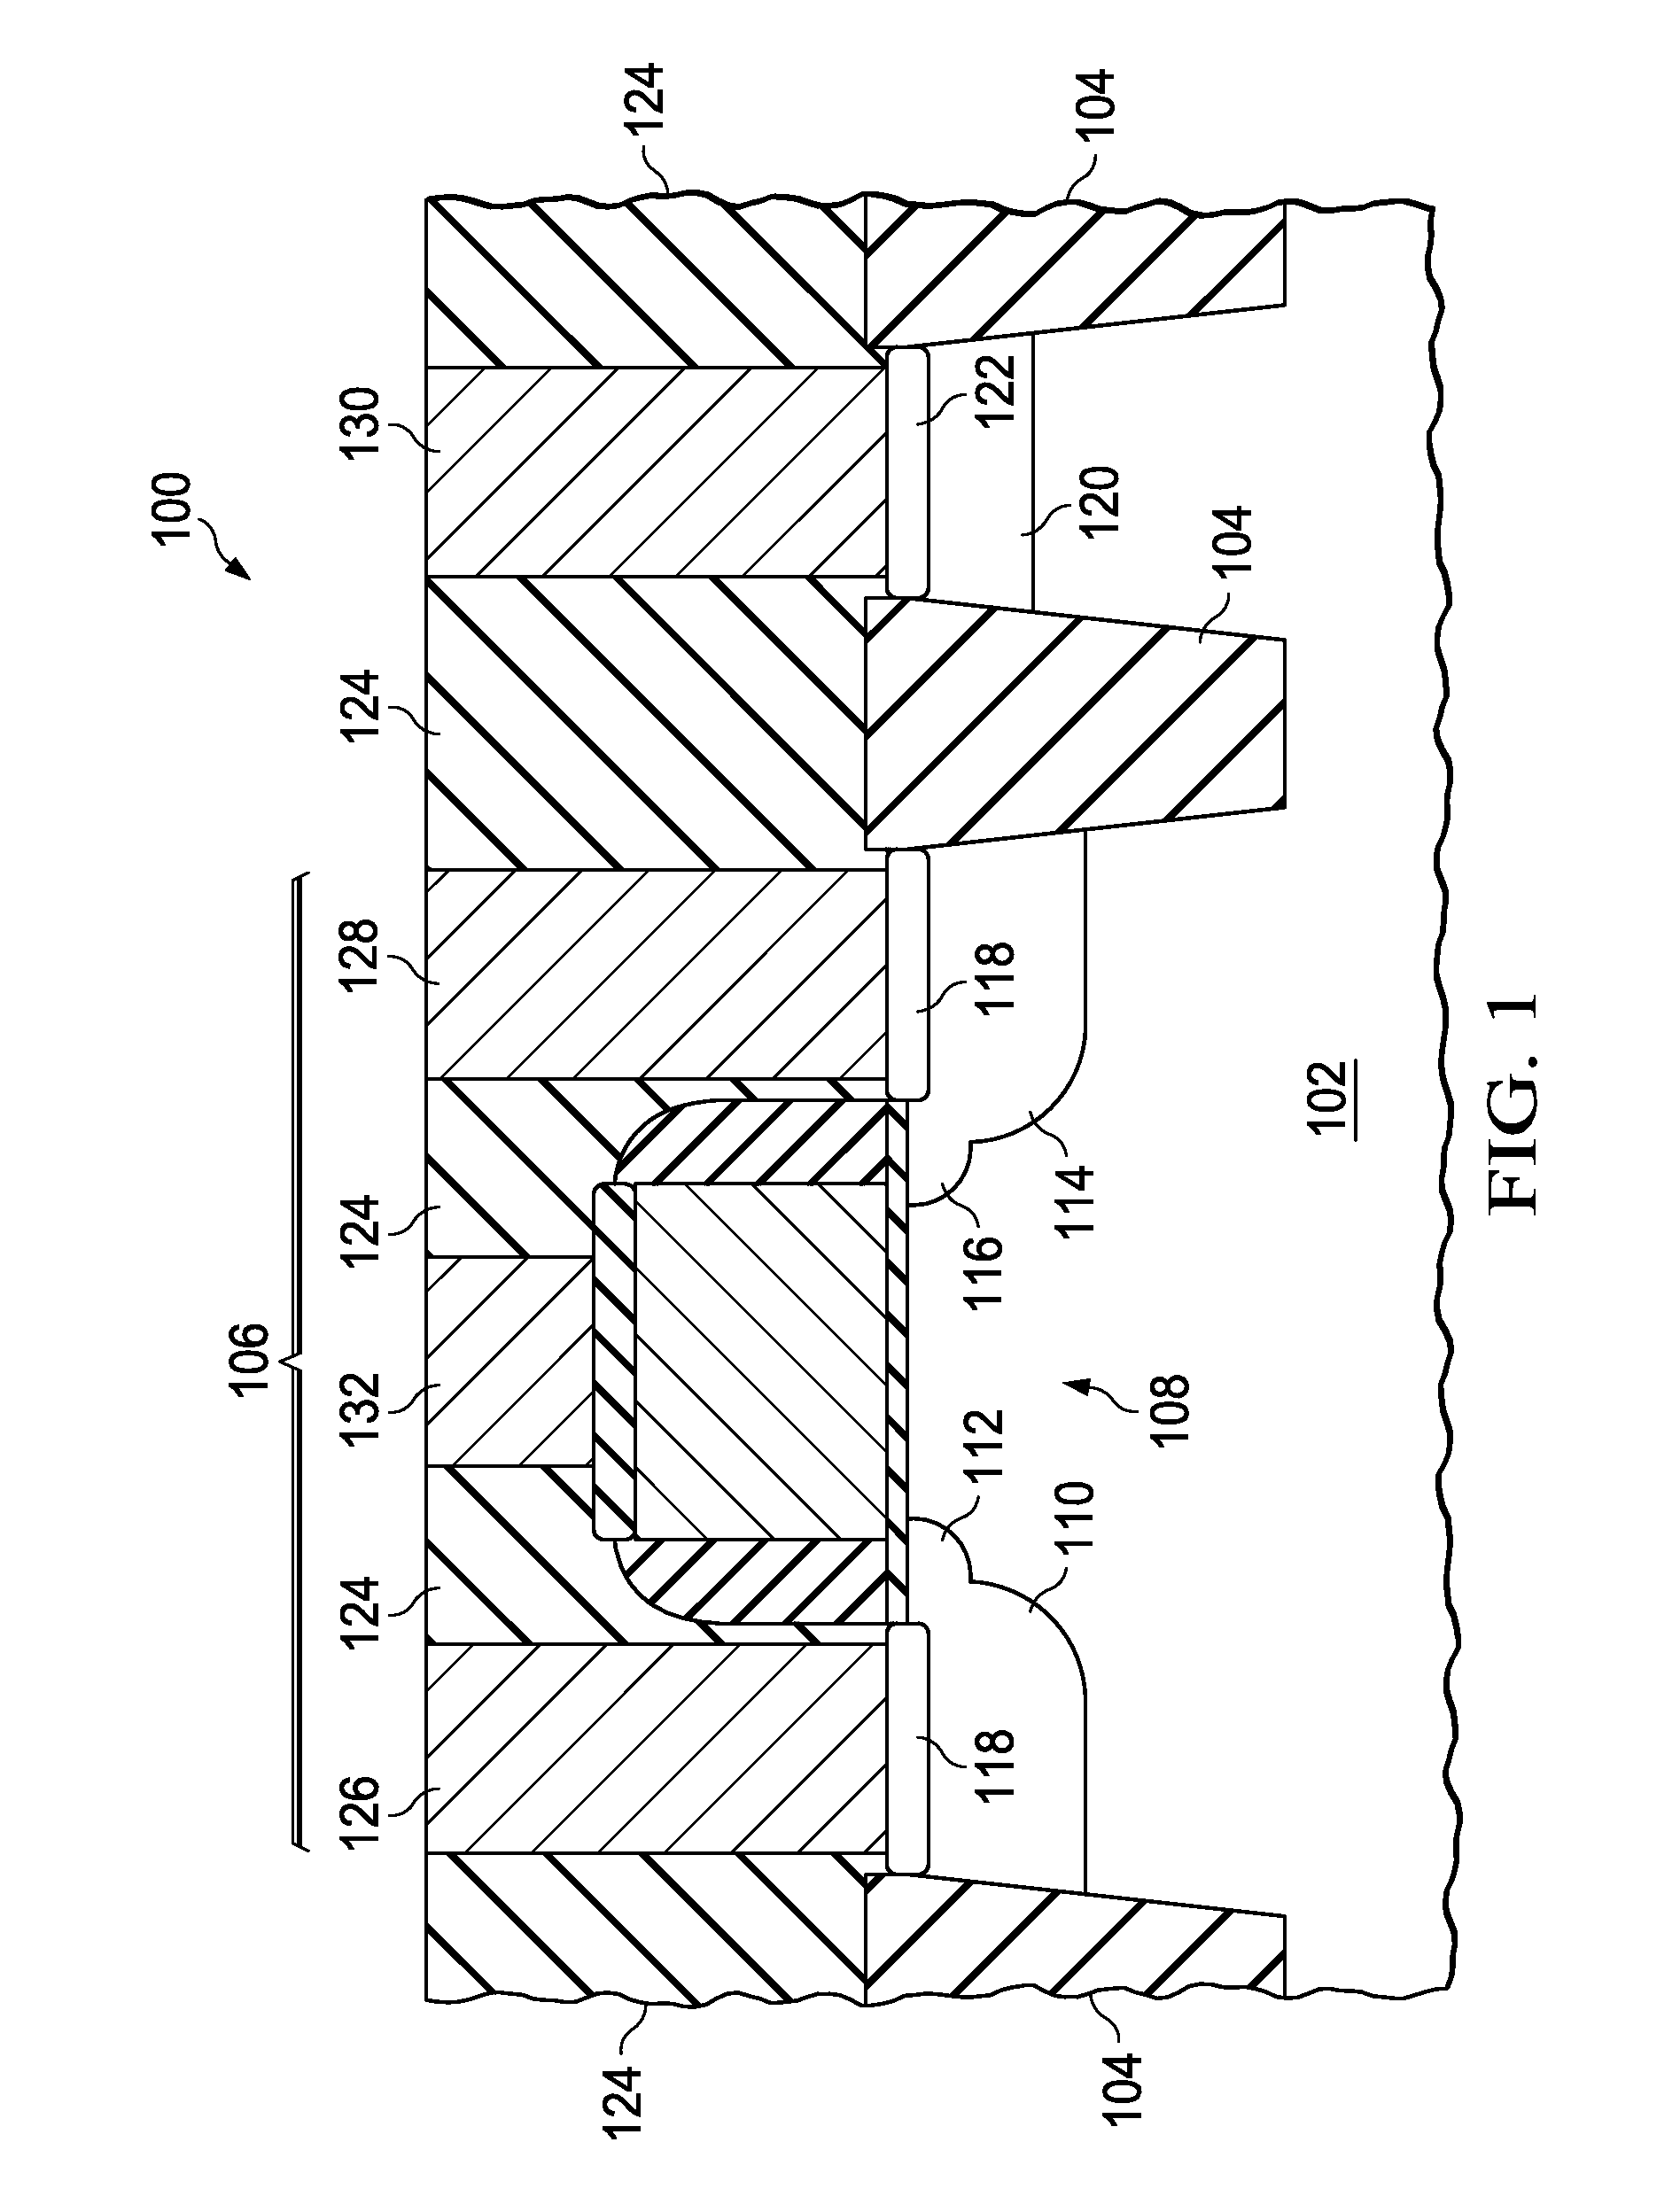 Method to Accurately Estimate the Source and Drain Resistance of a MOSFET